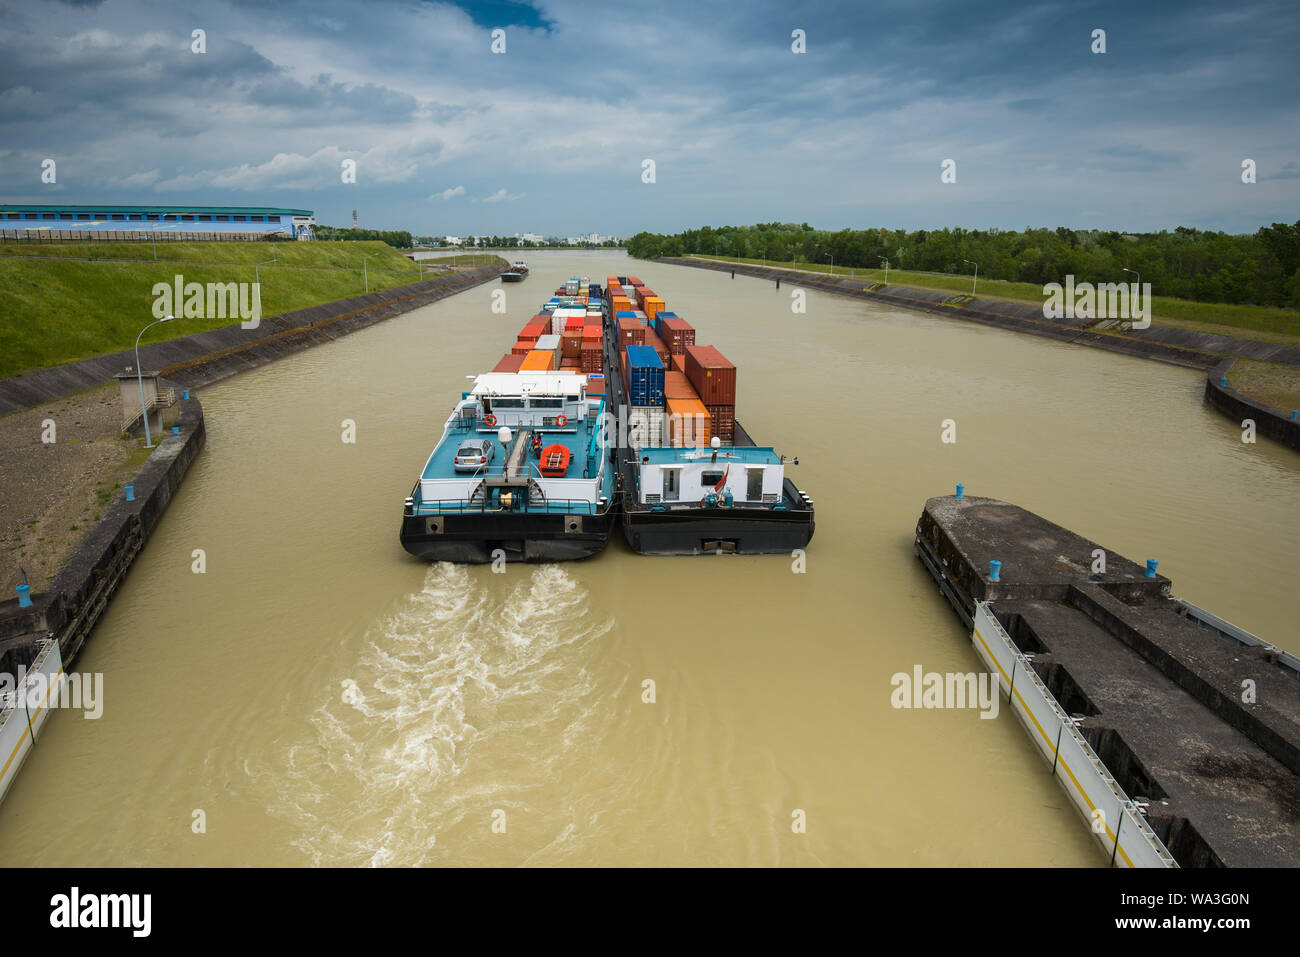 container-vessel transportation on river Stock Photo